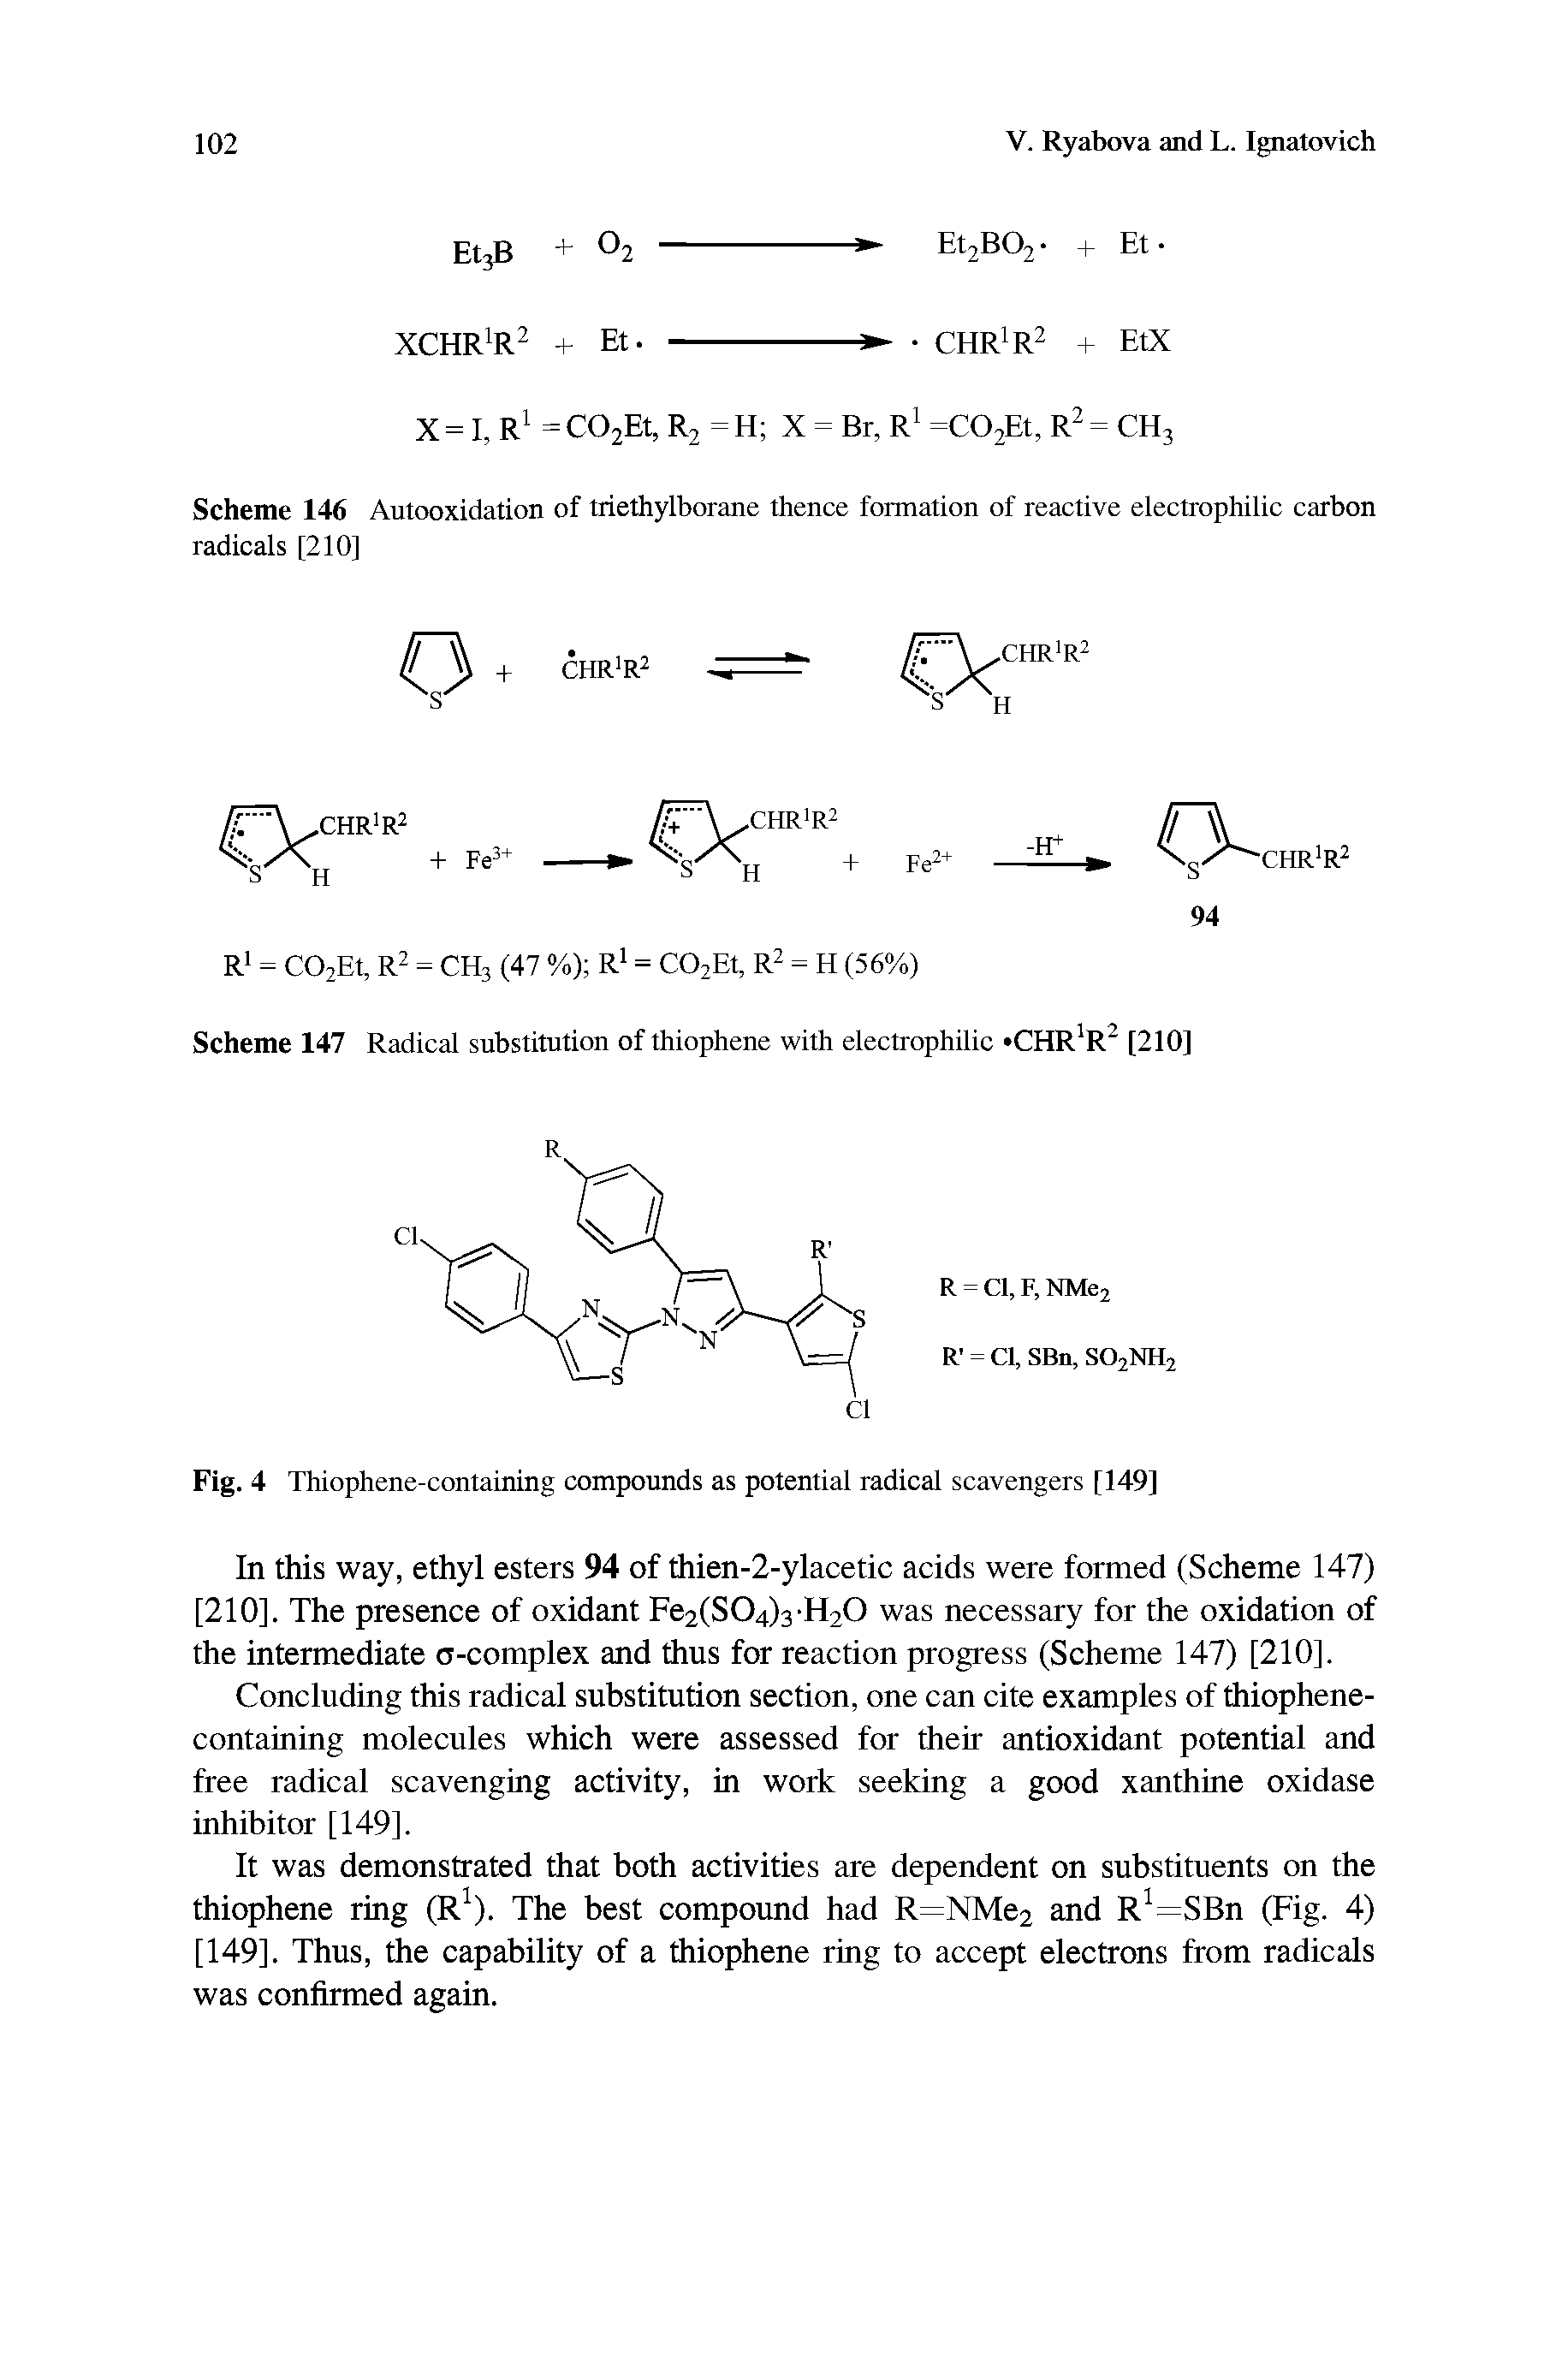 Scheme 147 Radical substitution of thiophene with electrophilic CHR R [210]...